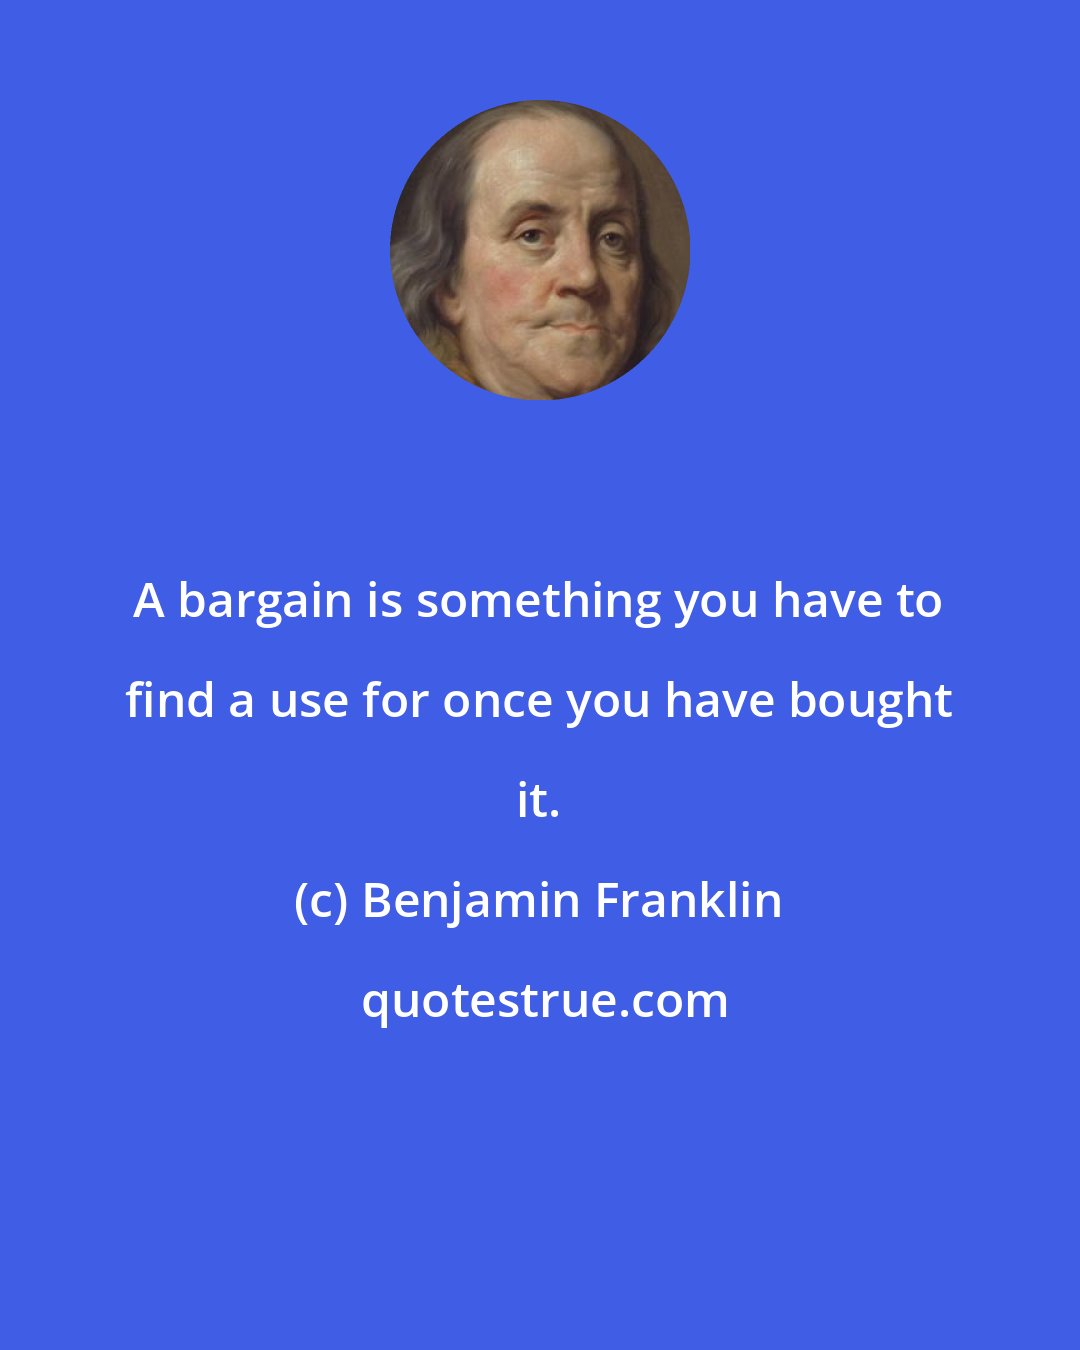 Benjamin Franklin: A bargain is something you have to find a use for once you have bought it.